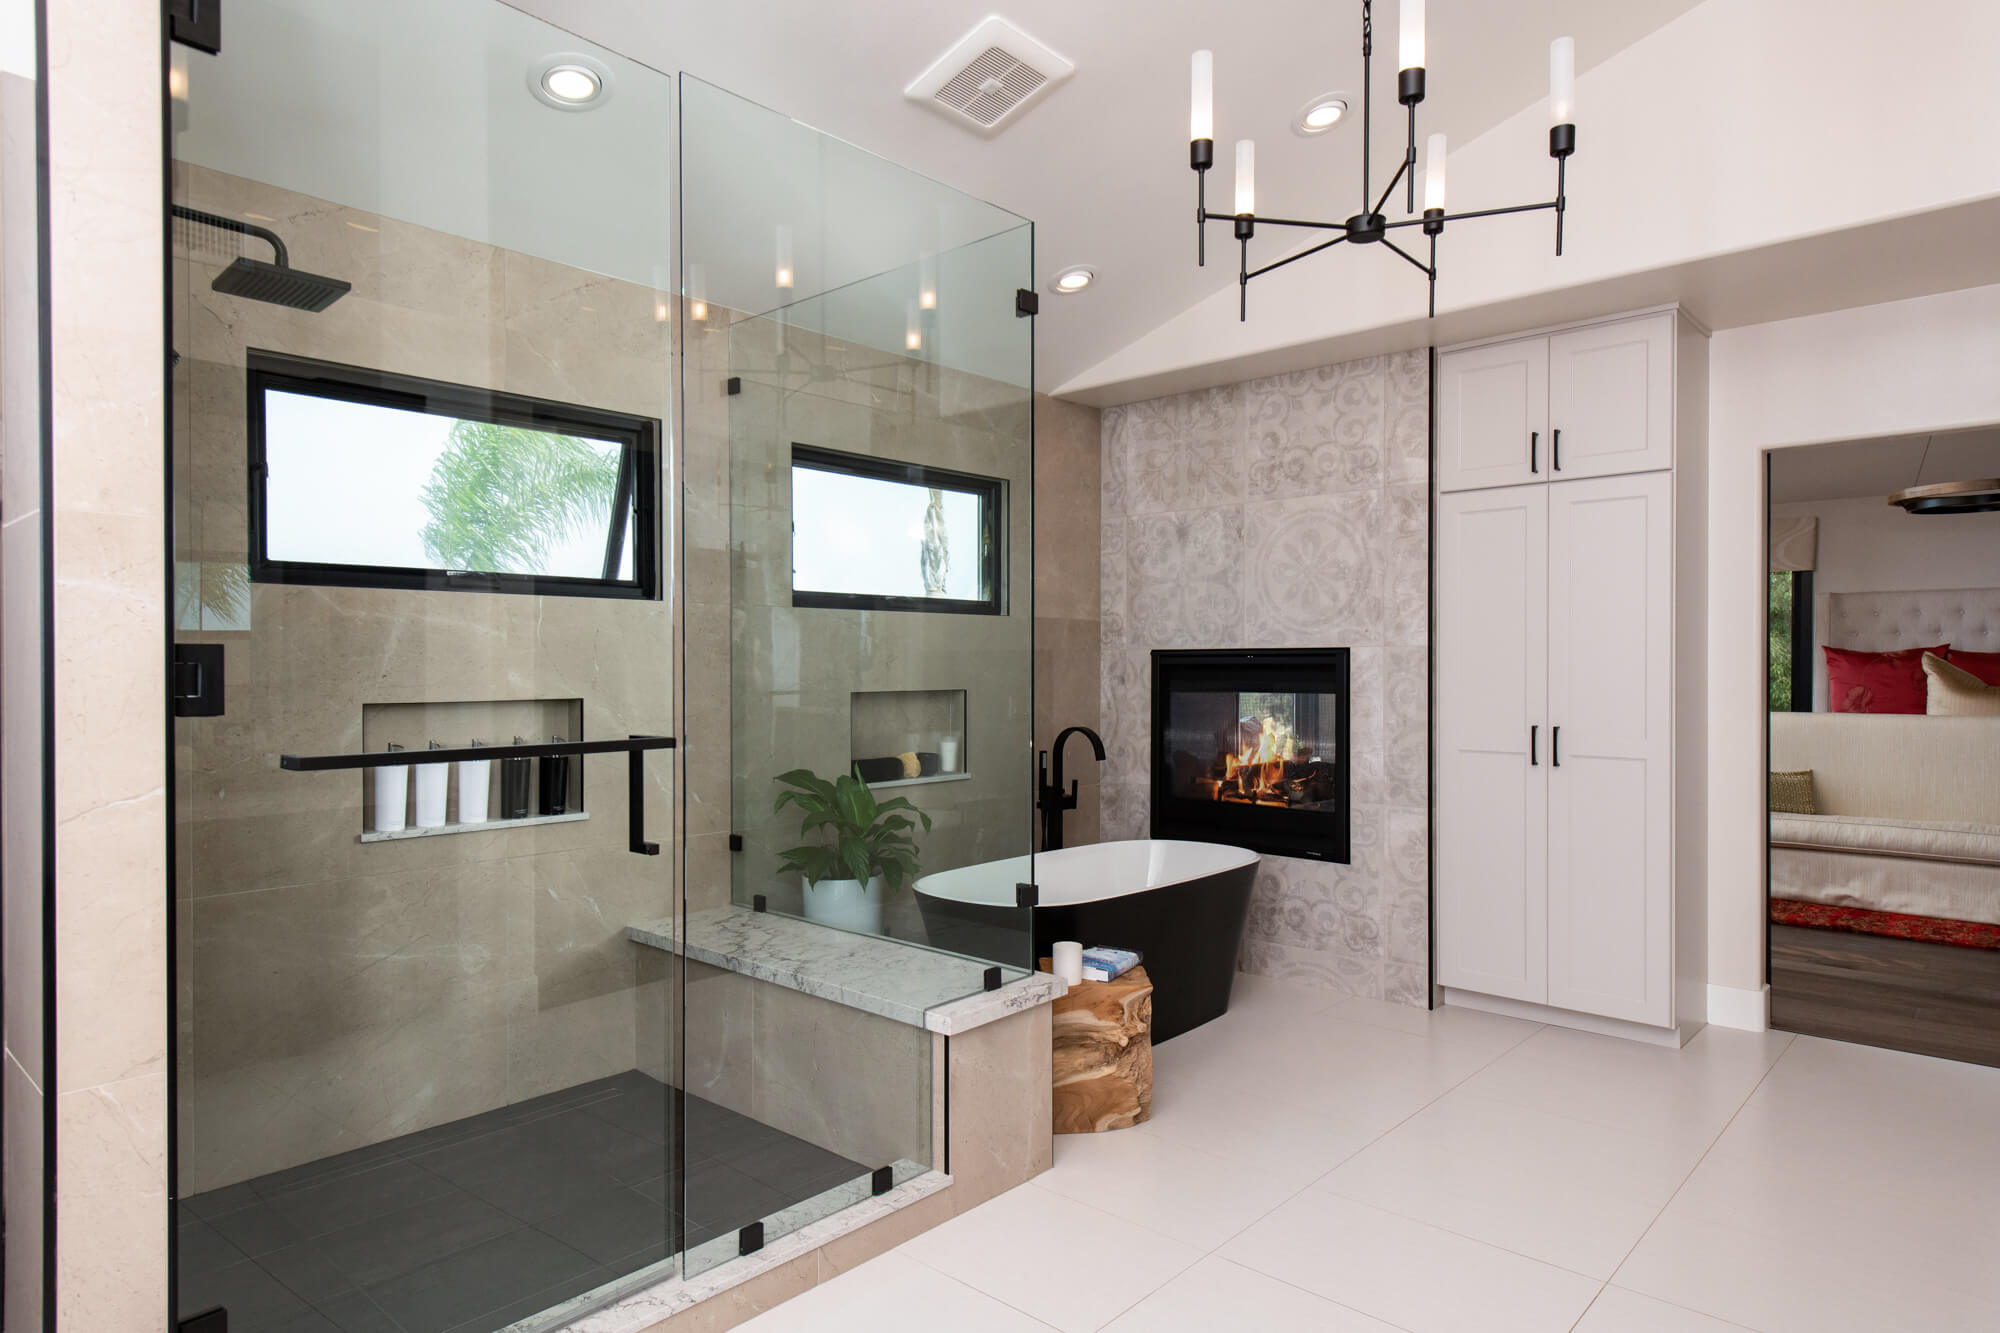 Master bathroom remodel with fireplace